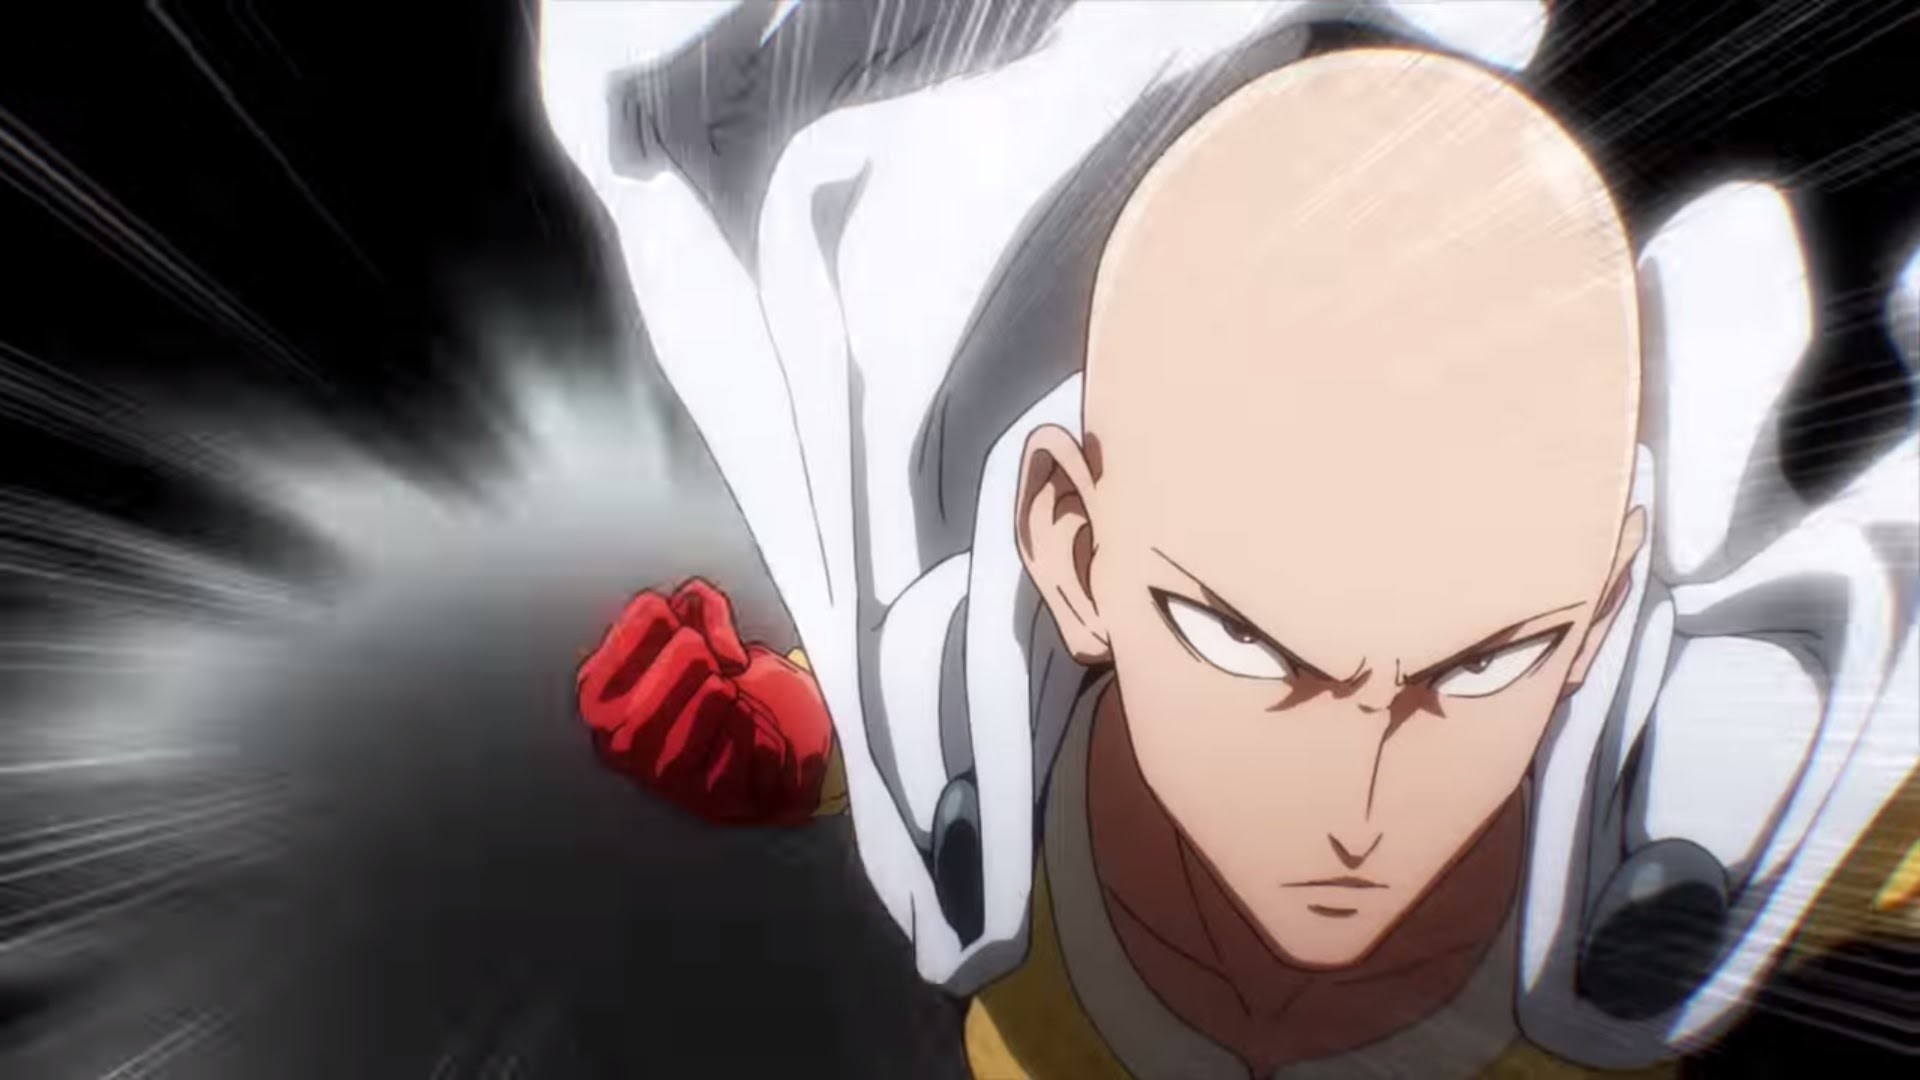 Very small HD one punch man wallpaper dump. by orktauOct 1. Load 8 more images Grid view